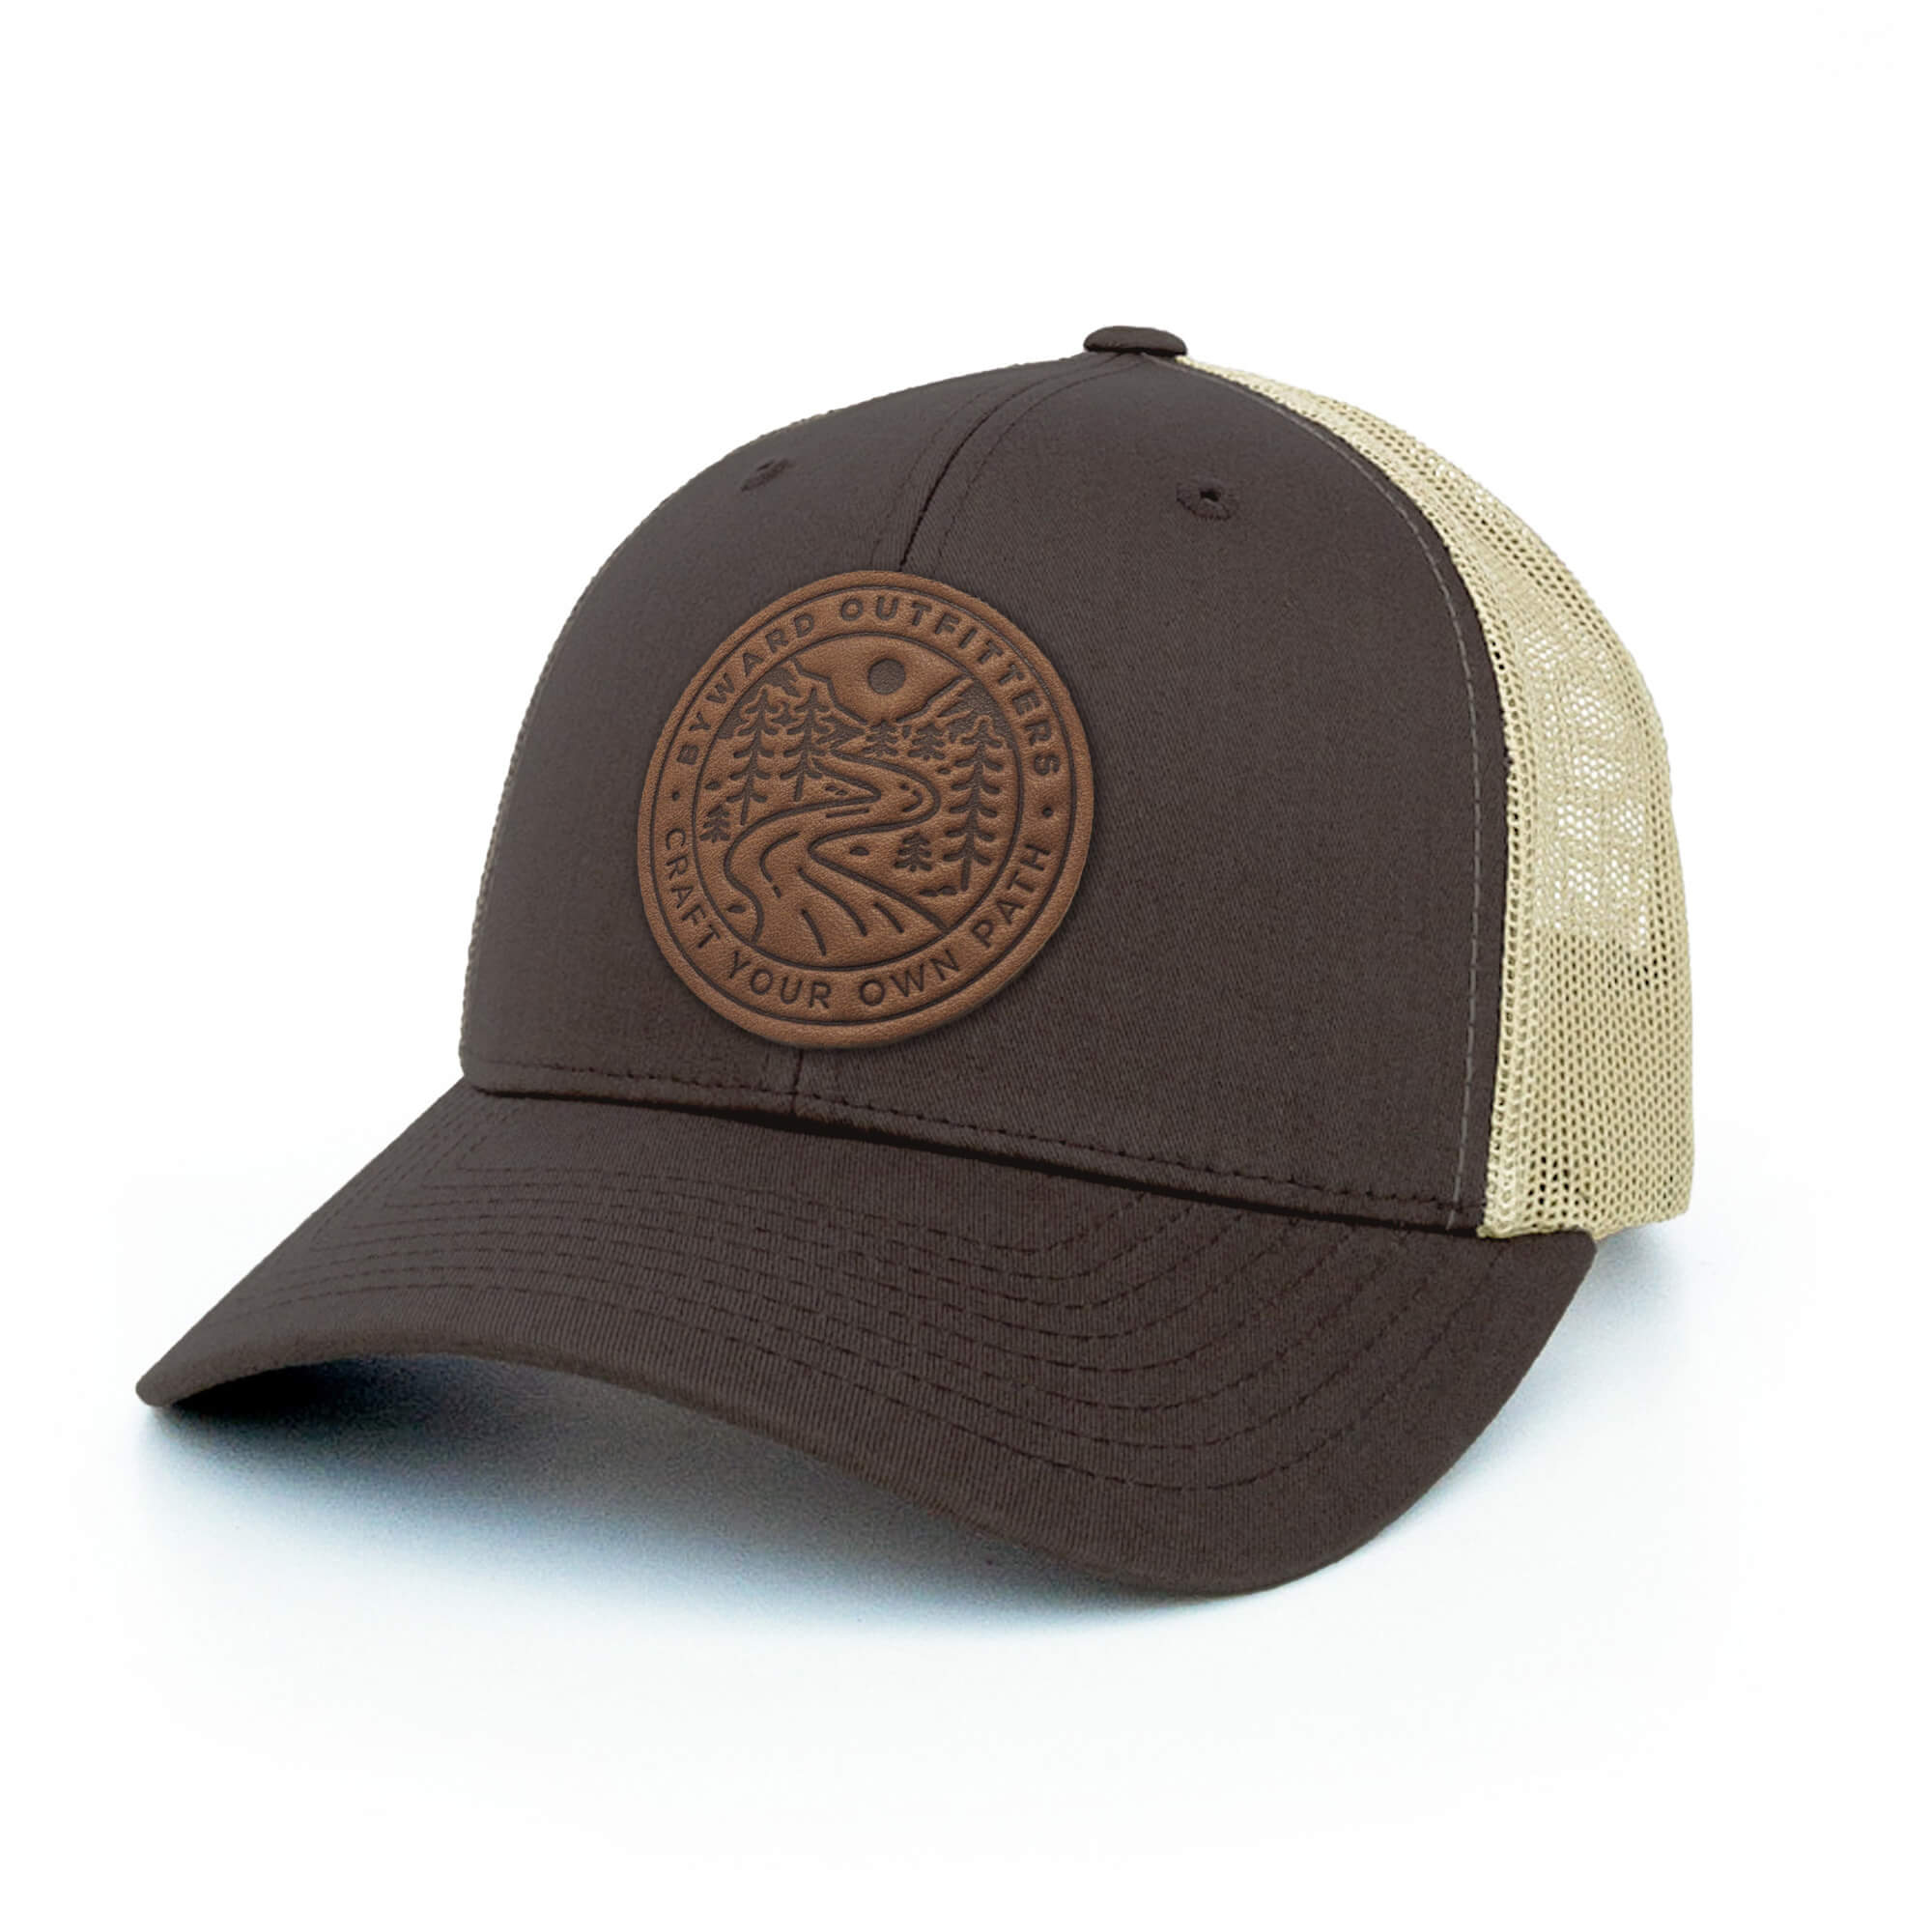 Brown and khaki trucker hat with full-grain leather patch of Winding Wilderness | BLACK-005-004, CHARC-005-004, NAVY-005-004, HGREY-005-004, MOSS-005-004, BROWN-005-004